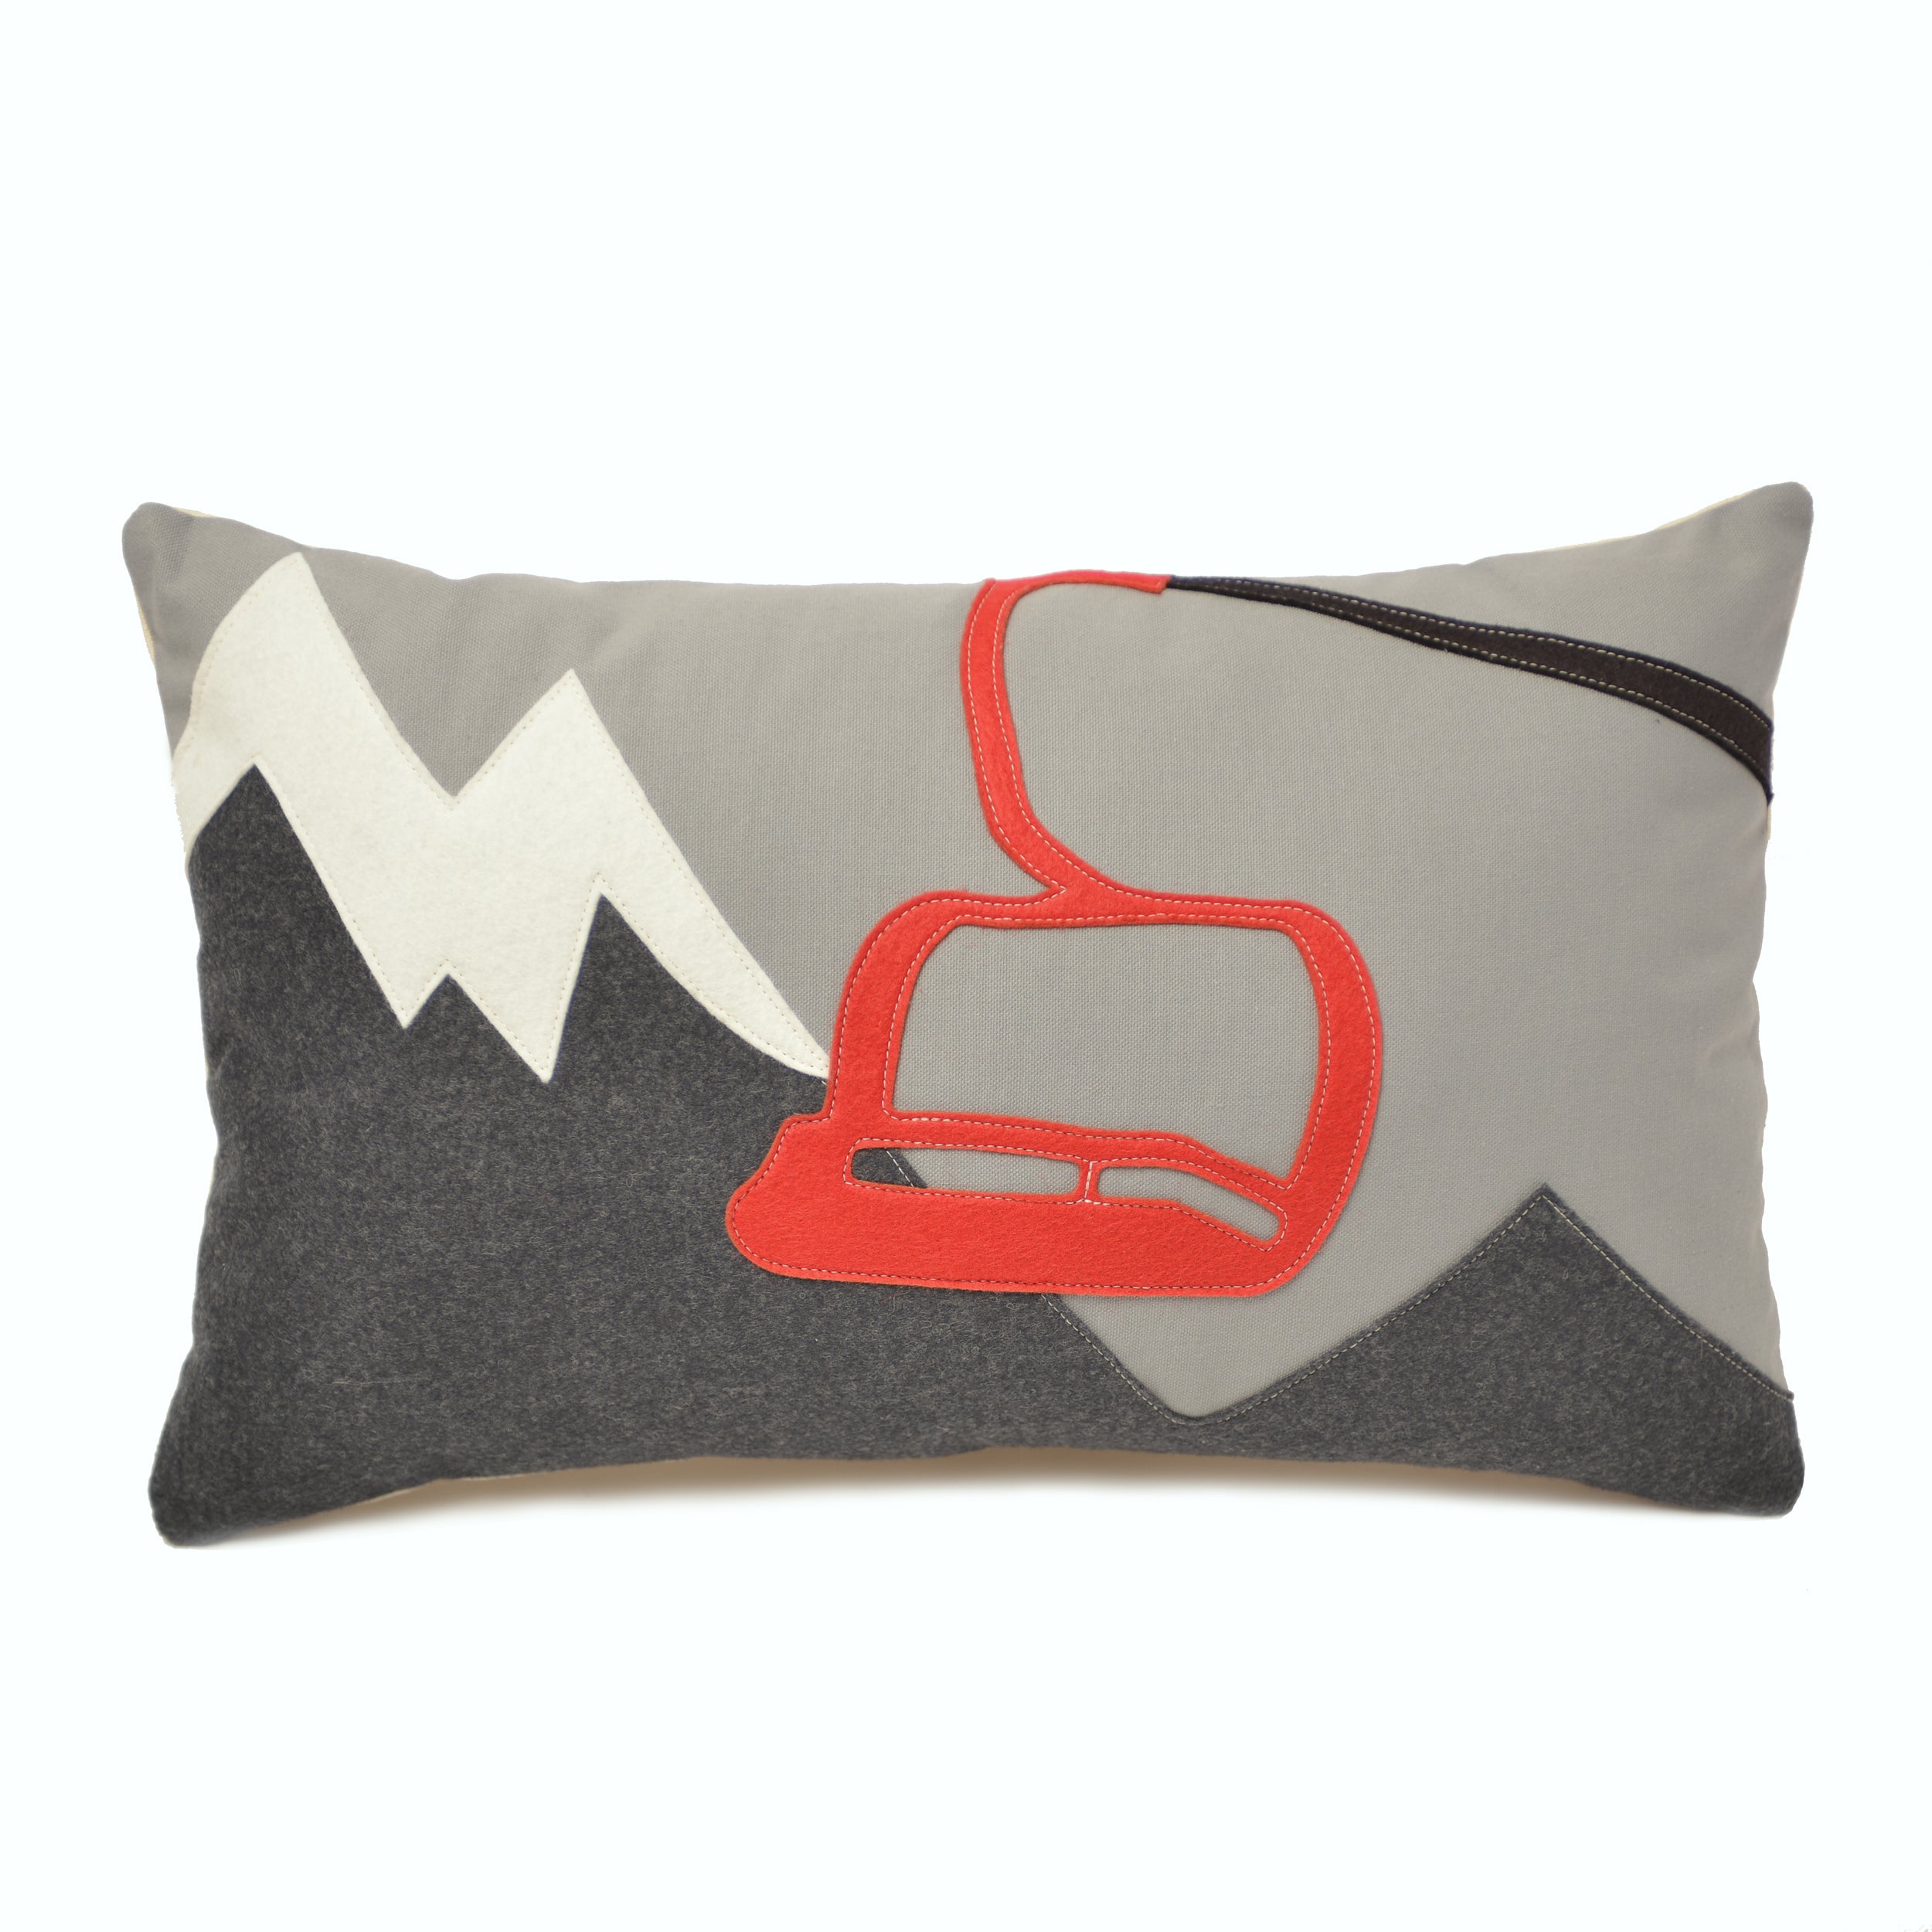 14x21" red chairlift on mountains lumbar pillow, GREY